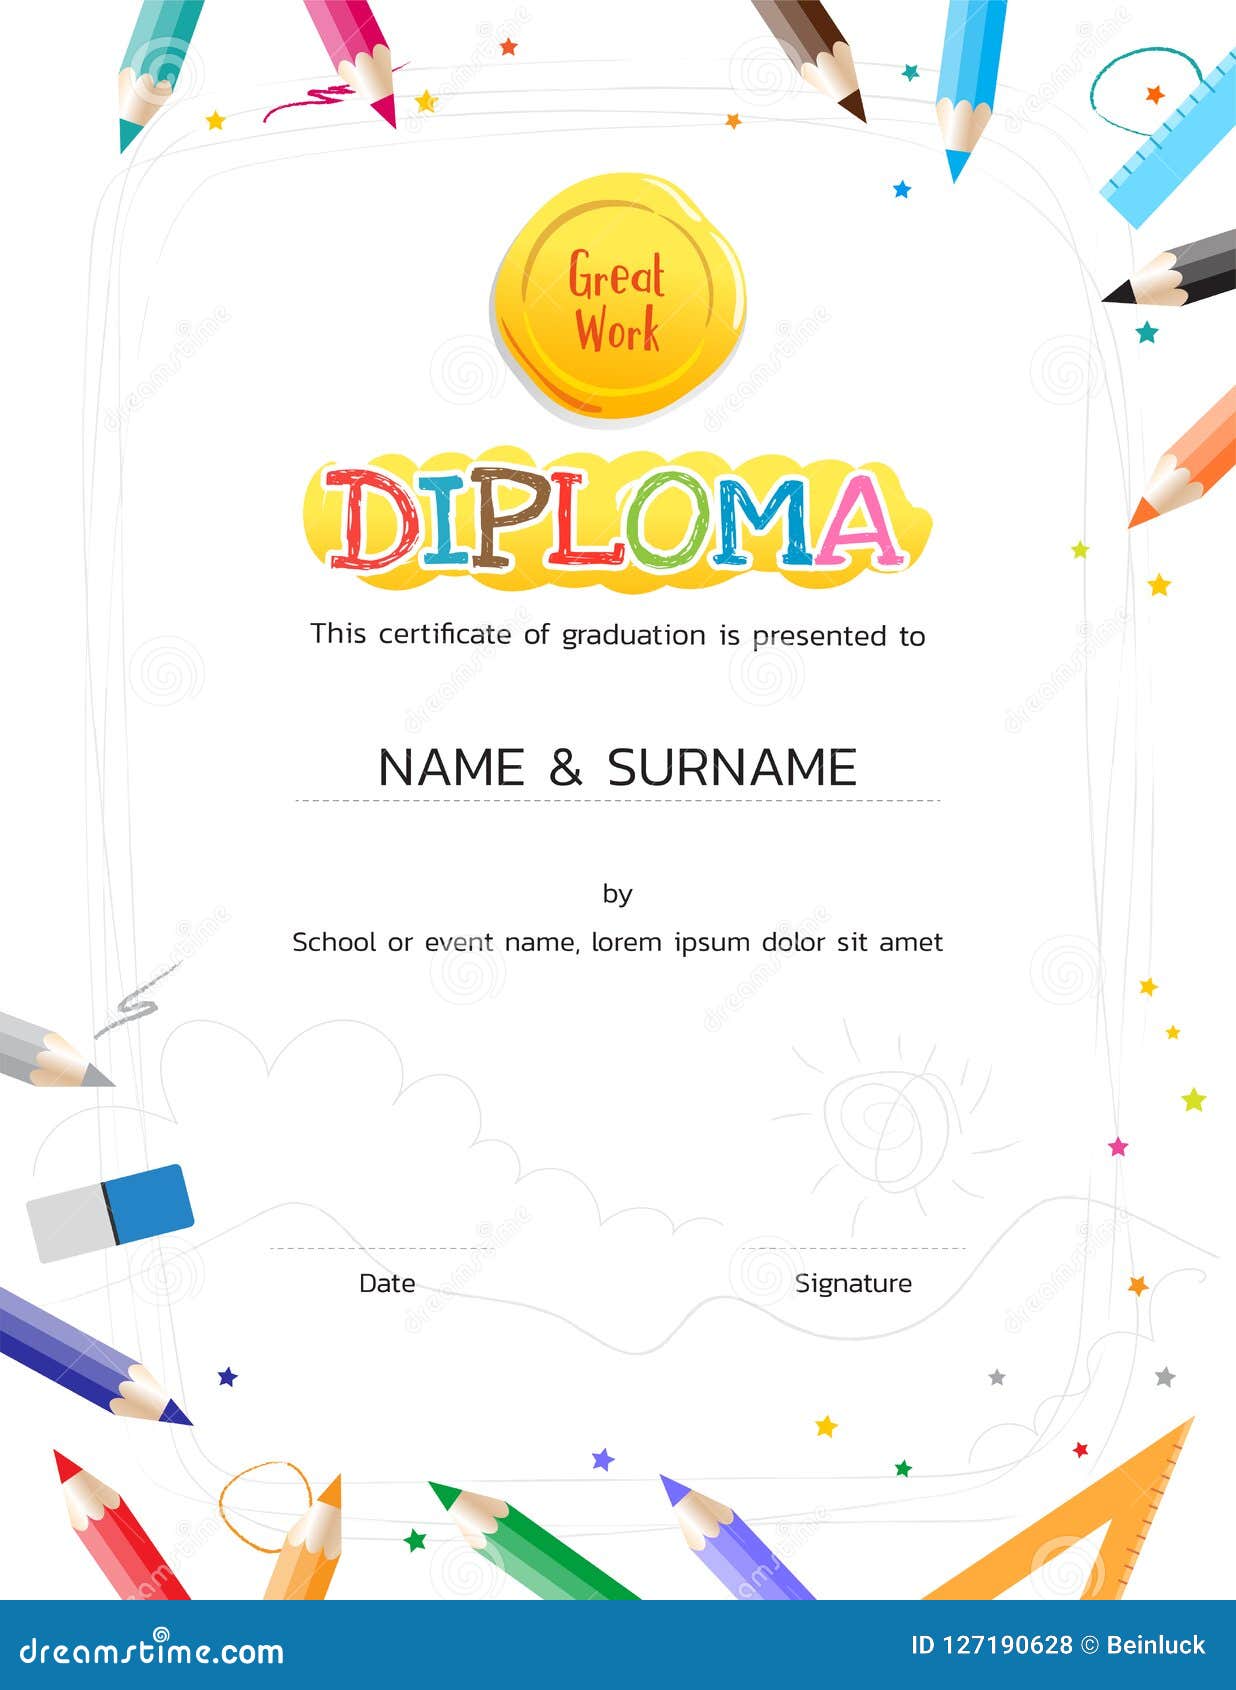 Kids Diploma or Certificate Template with Painting Stuff Border Intended For Free Printable Certificate Templates For Kids